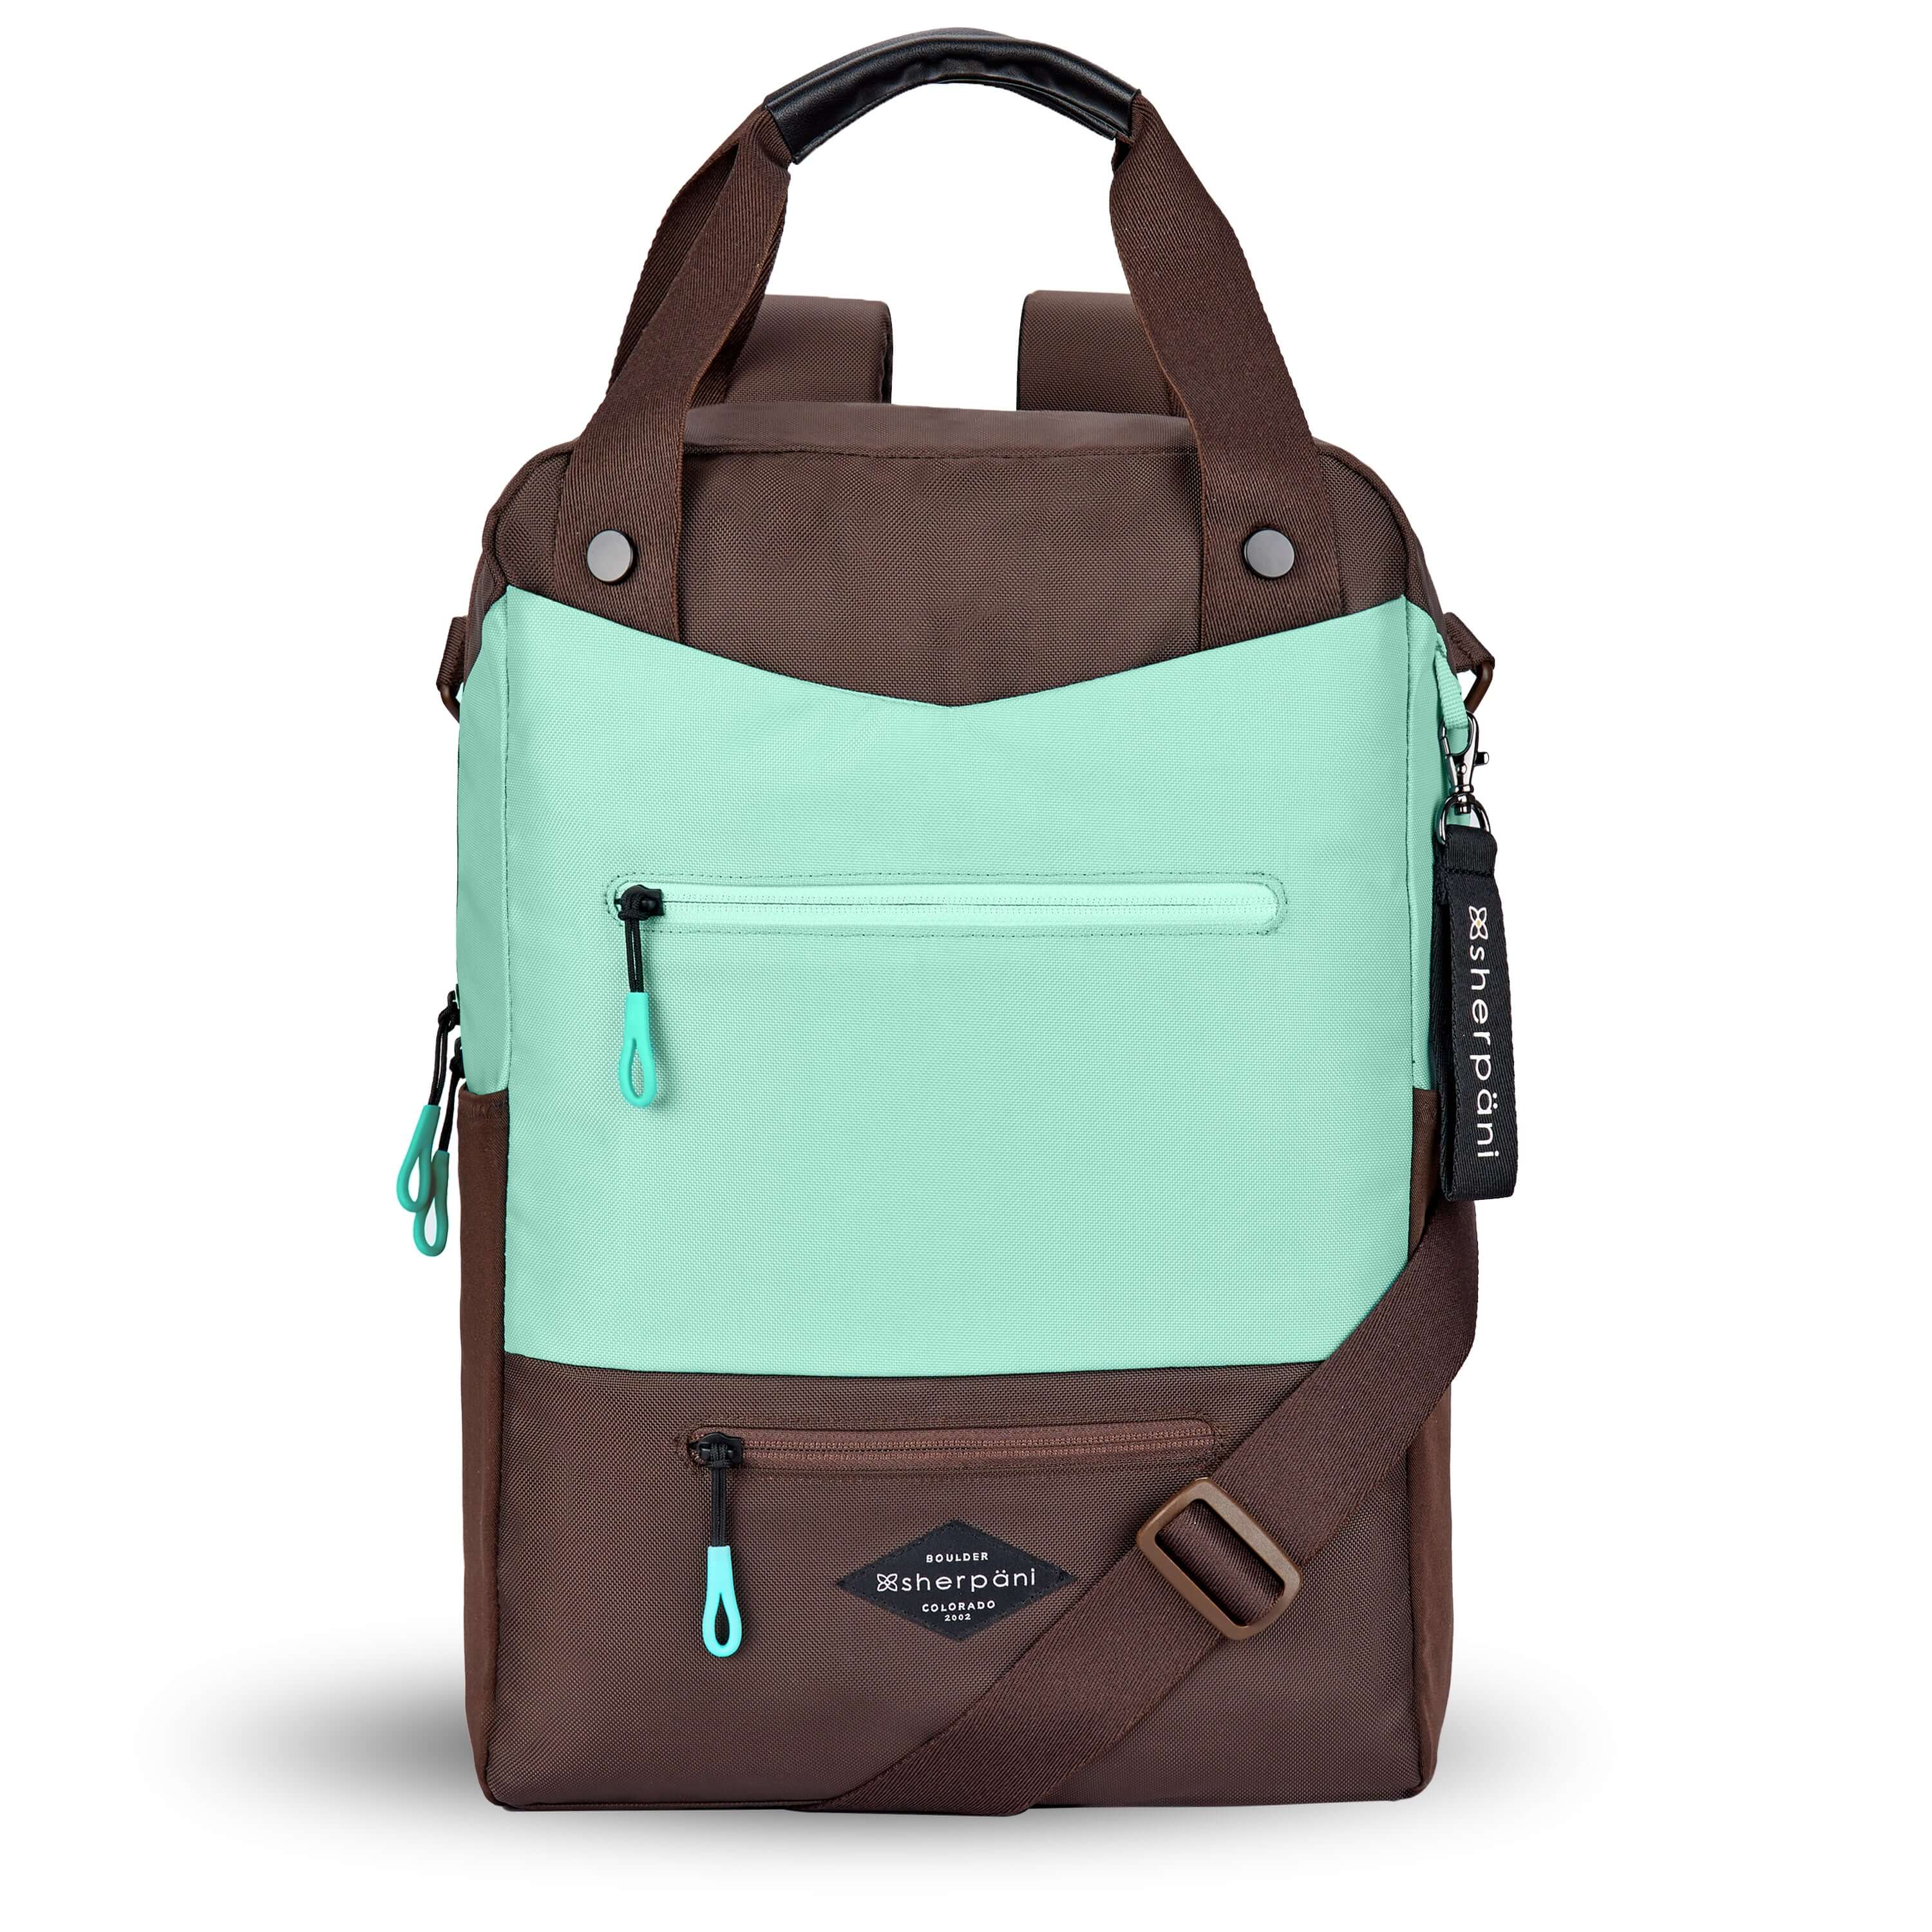 Flat front view of Sherpani's three-in-one bag, the Camden in Seagreen. The bag is two-toned in light green and brown. There are two external zipper pockets on the front panel with easy-pull zippers in light green. A branded Sherpani keychain is clipped to the upper right corner. An elastic water bottle holder sits on either side of the bag. The bag has an adjustable/detachable crossbody strap, padded/adjustable backpack straps and short tote handles fixed at the top. 